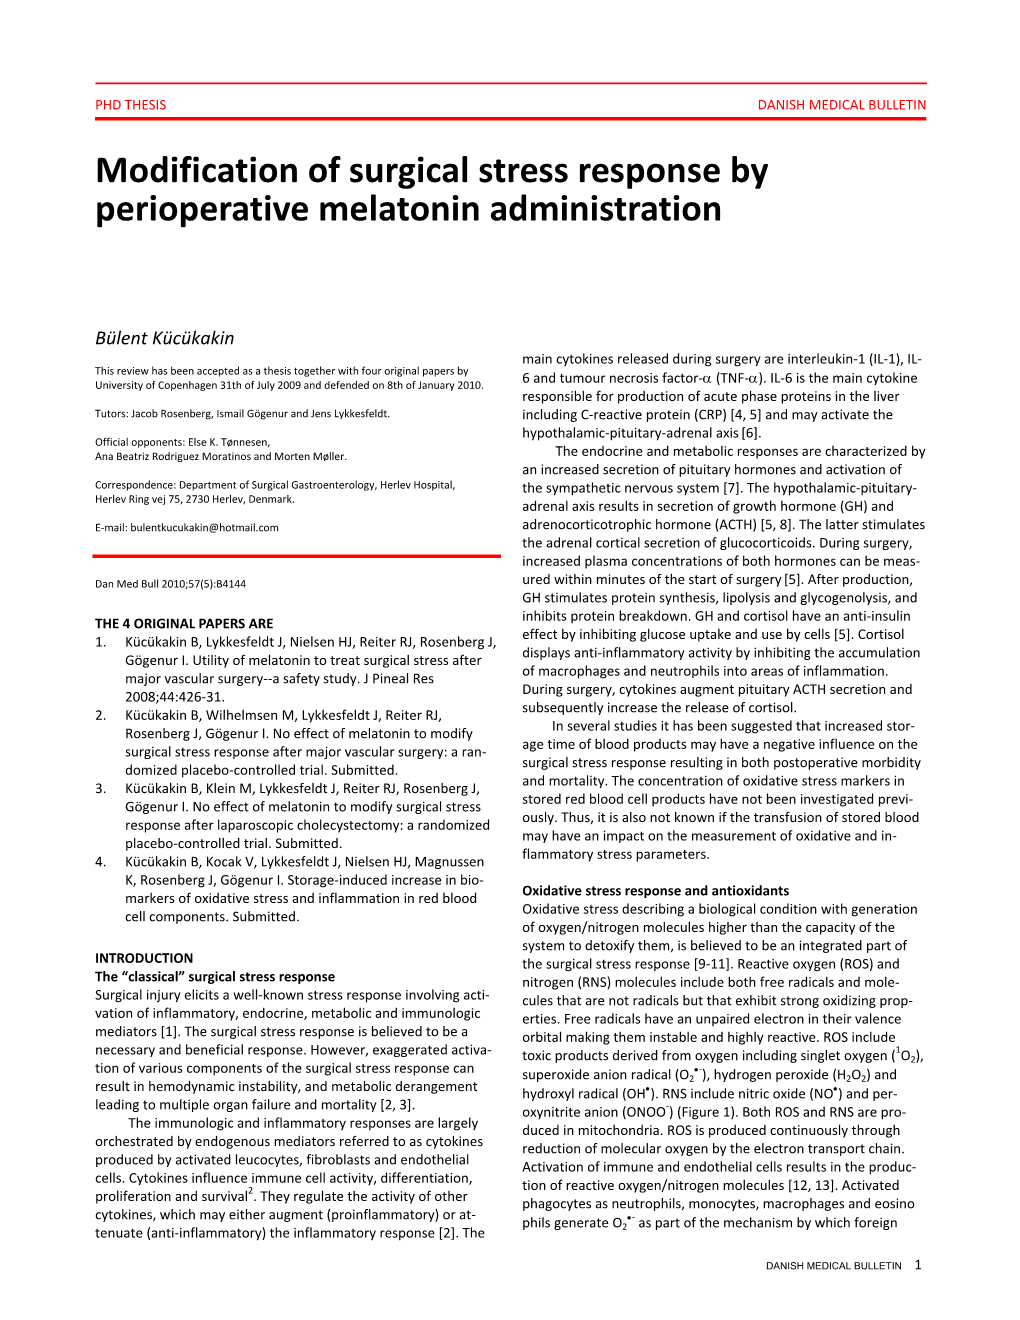 Modification of Surgical Stress Response by Perioperative Melatonin Administration